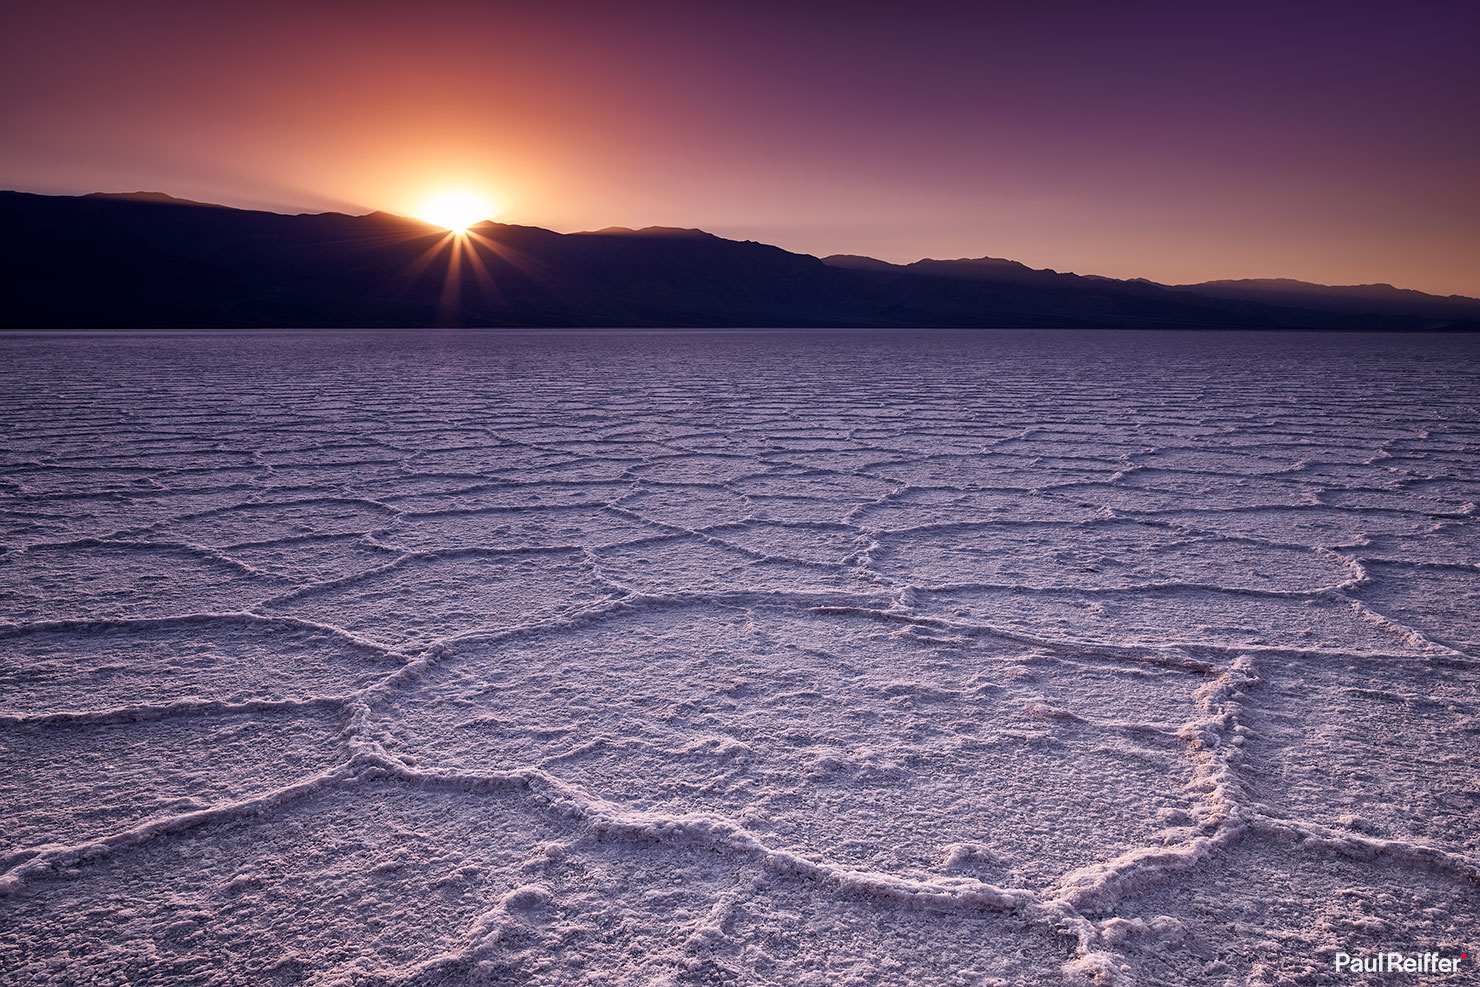 Death Valley Hexagons Sunset Flare Sun Salt Flats Paul Reiffer How To When Visit National Park California Mountains Professional Photography Guide